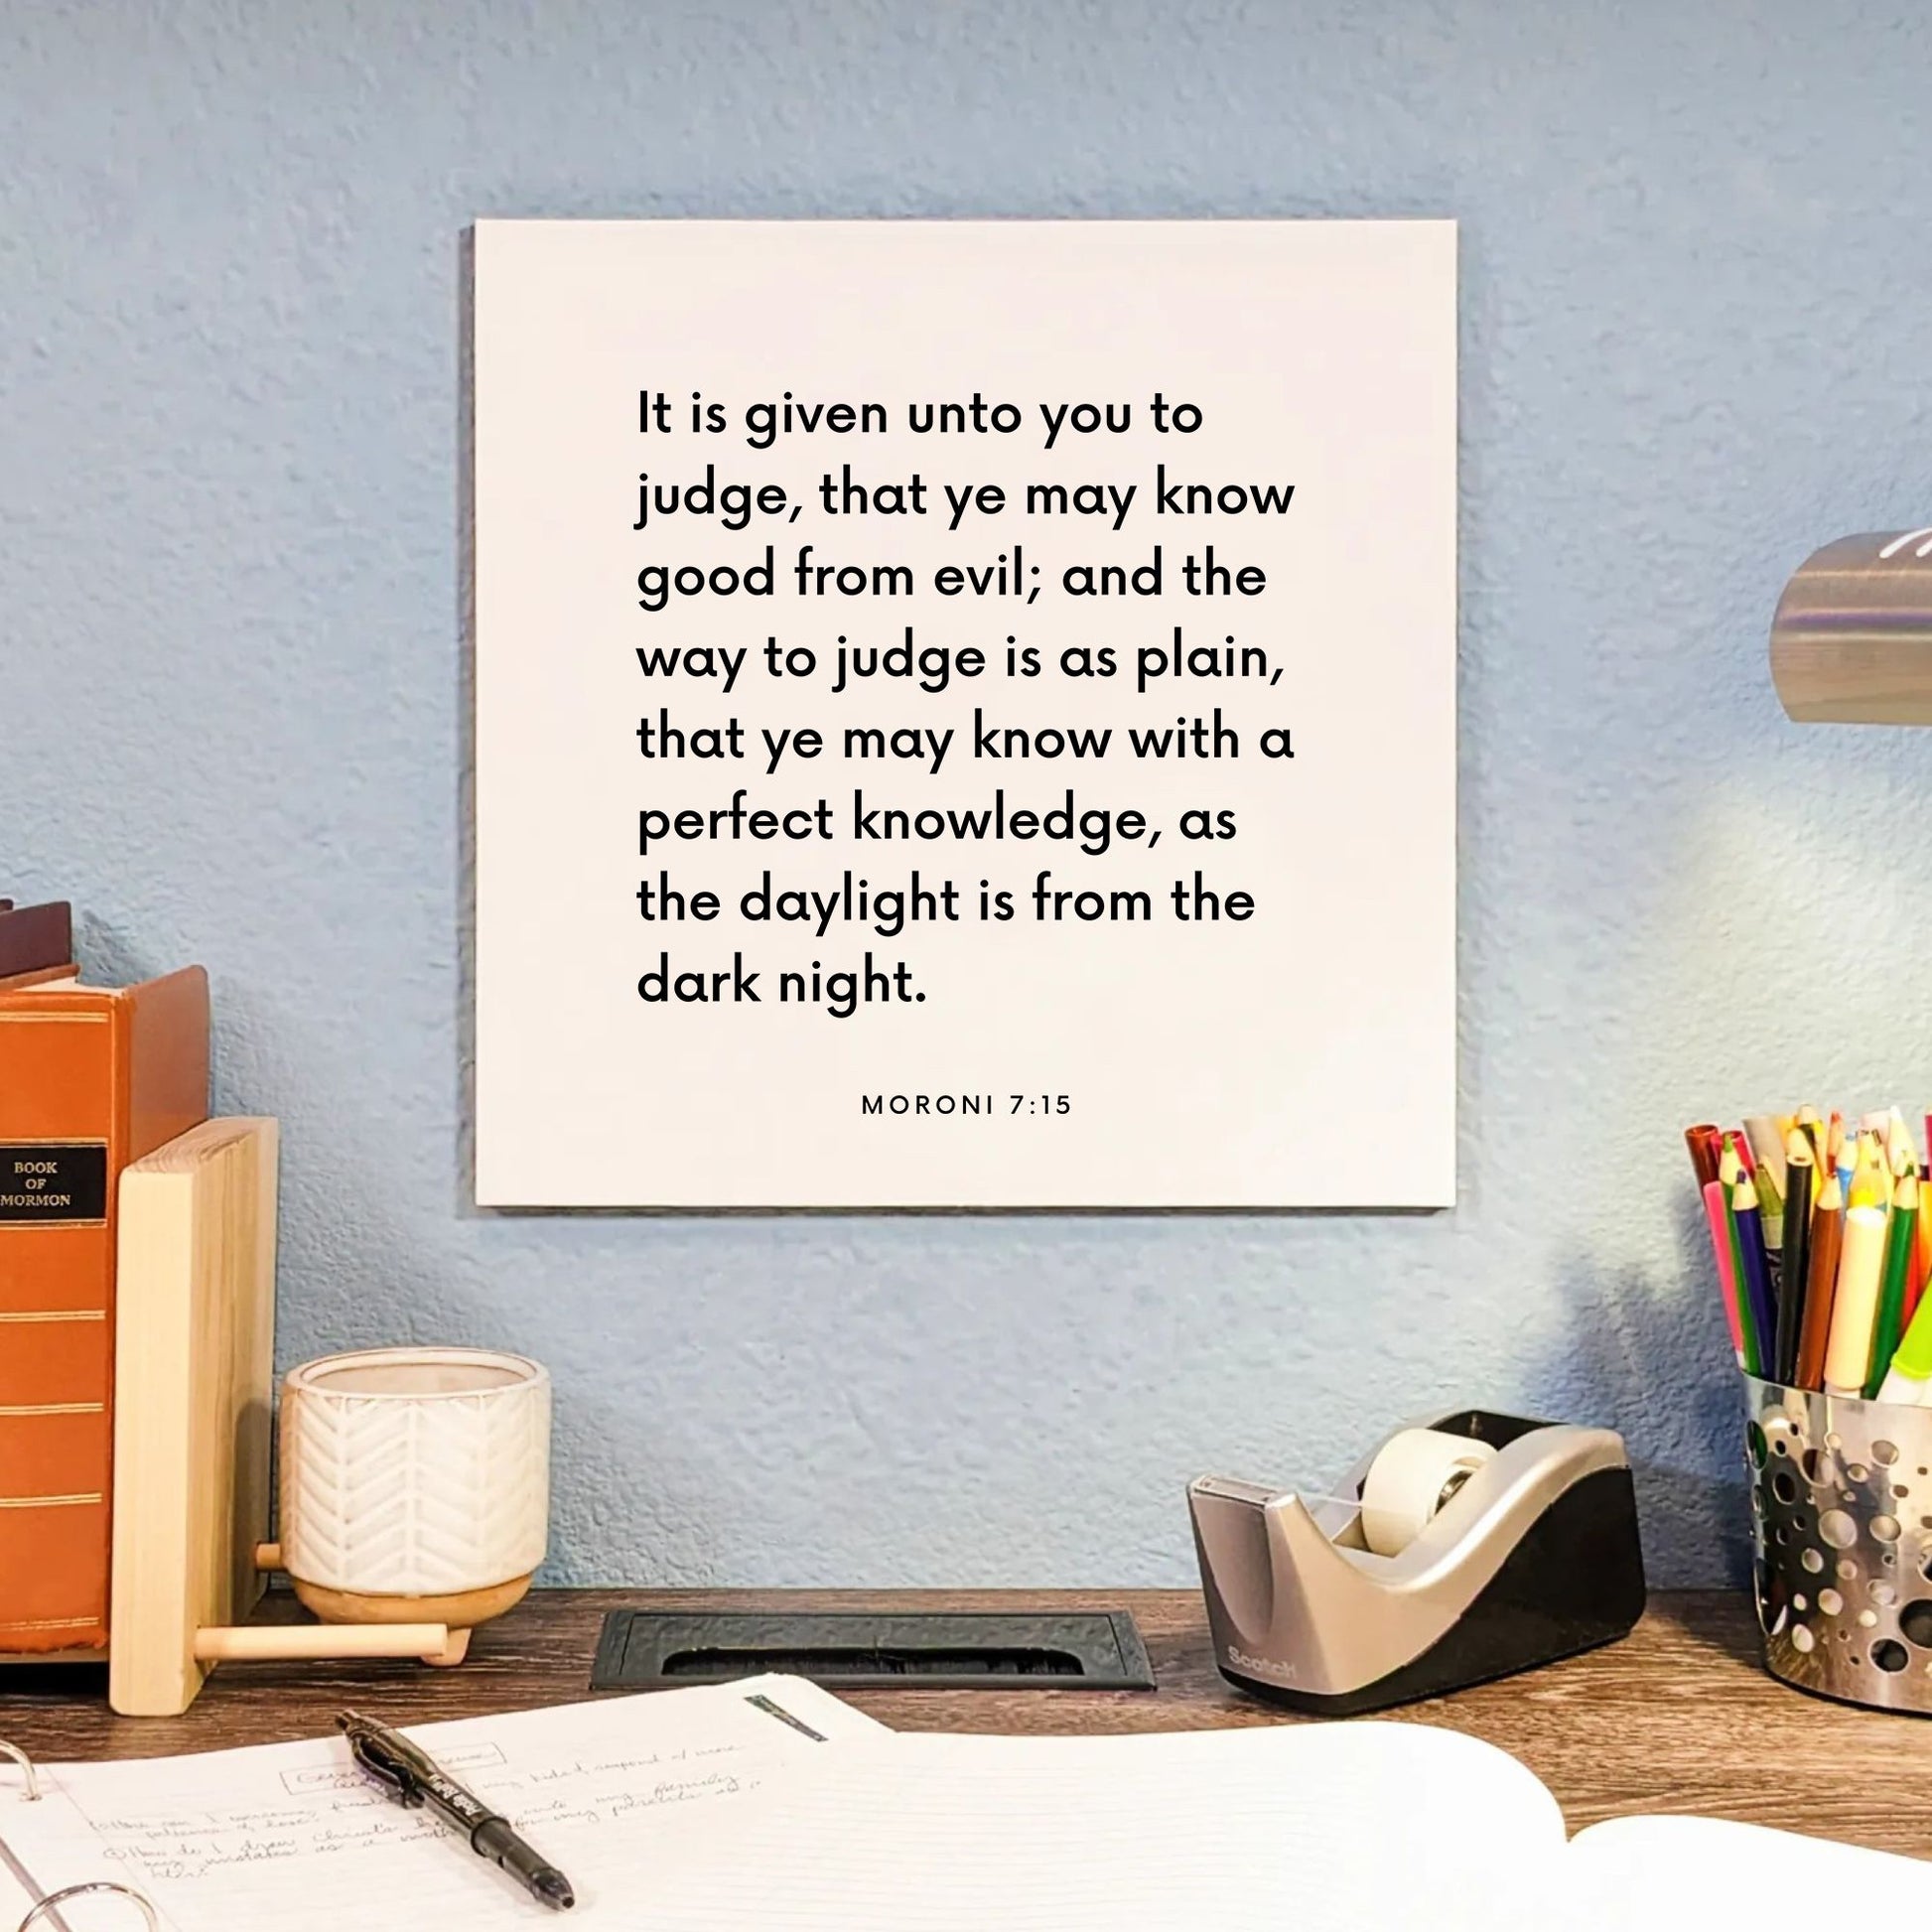 Desk mouting of the scripture tile for Moroni 7:15 - "It is given unto you to judge"